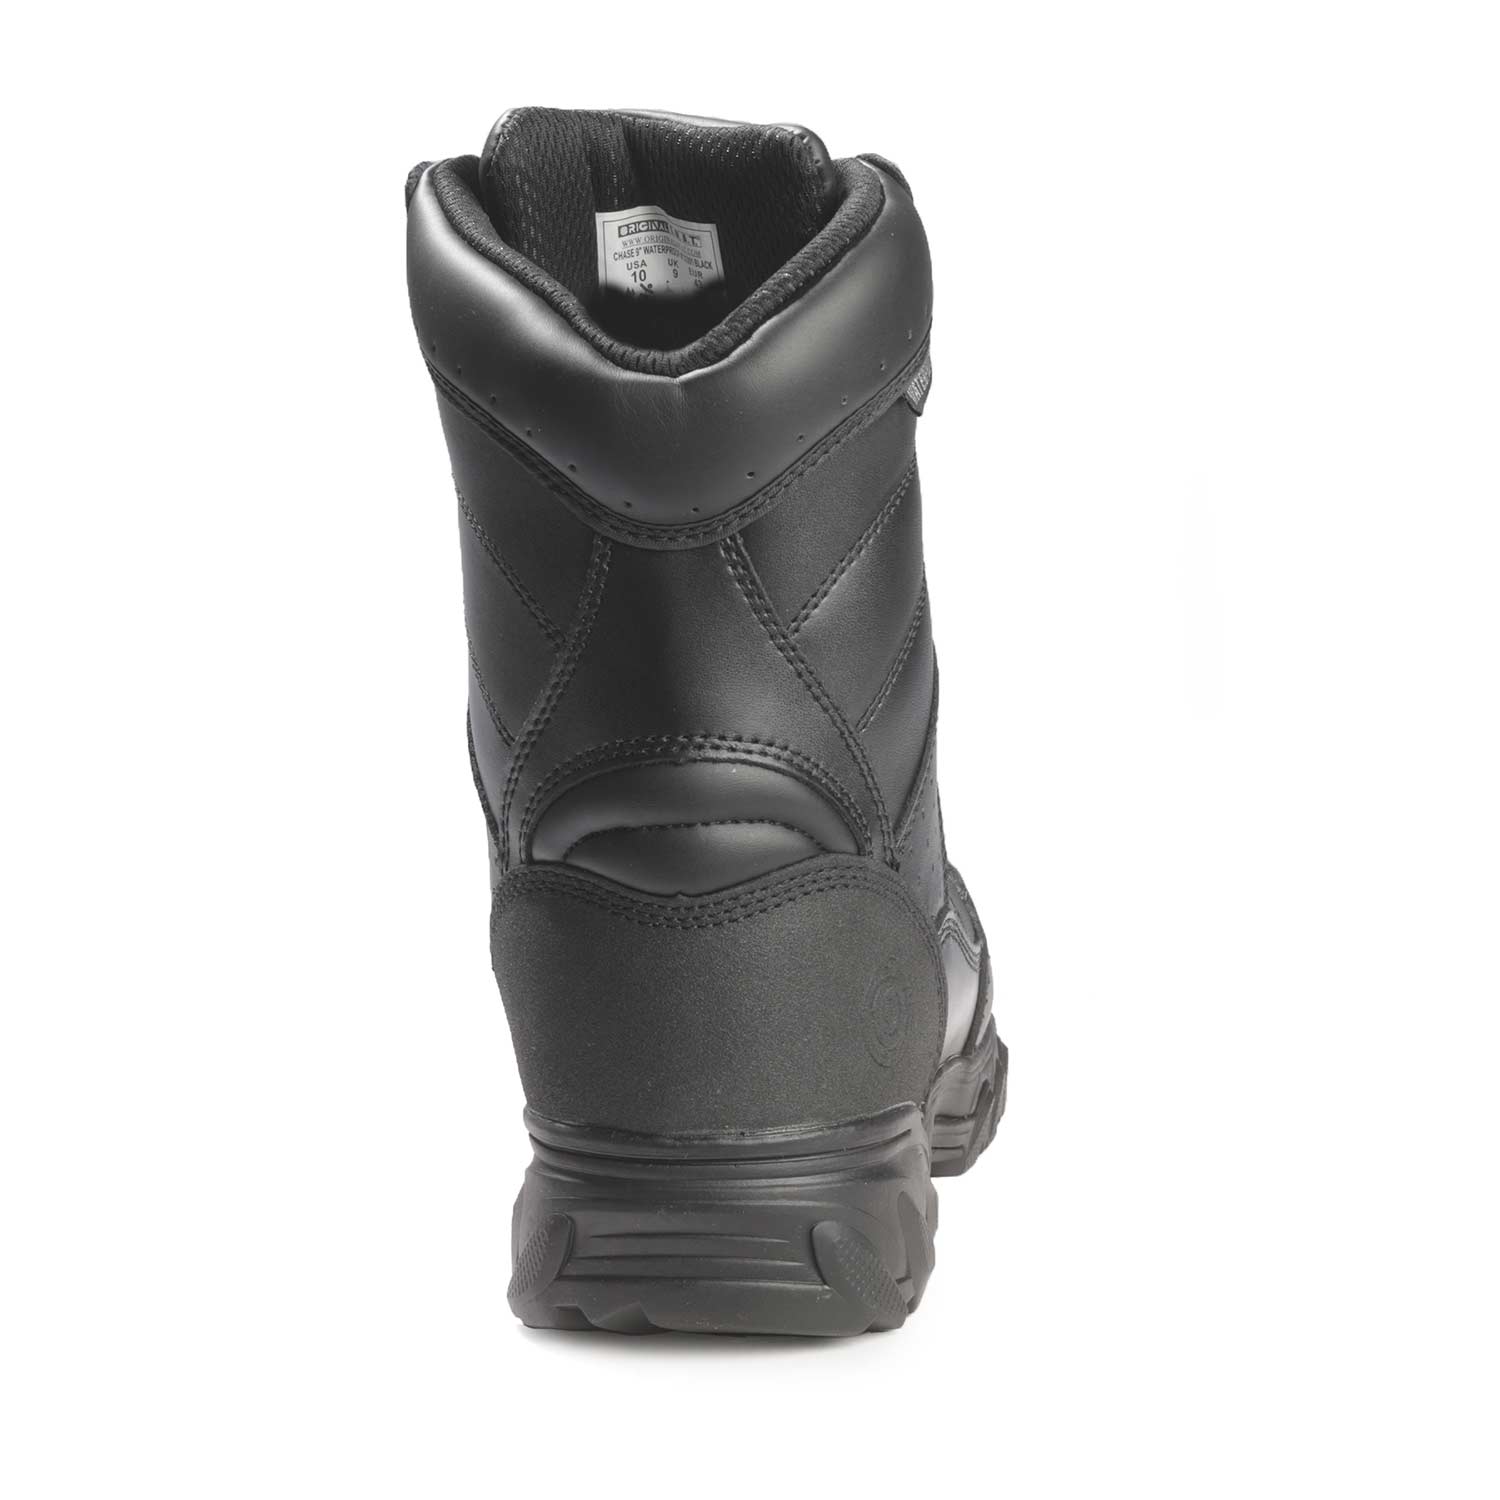 Original S.W.A.T. 9" Chase Tactical Waterproof Boot